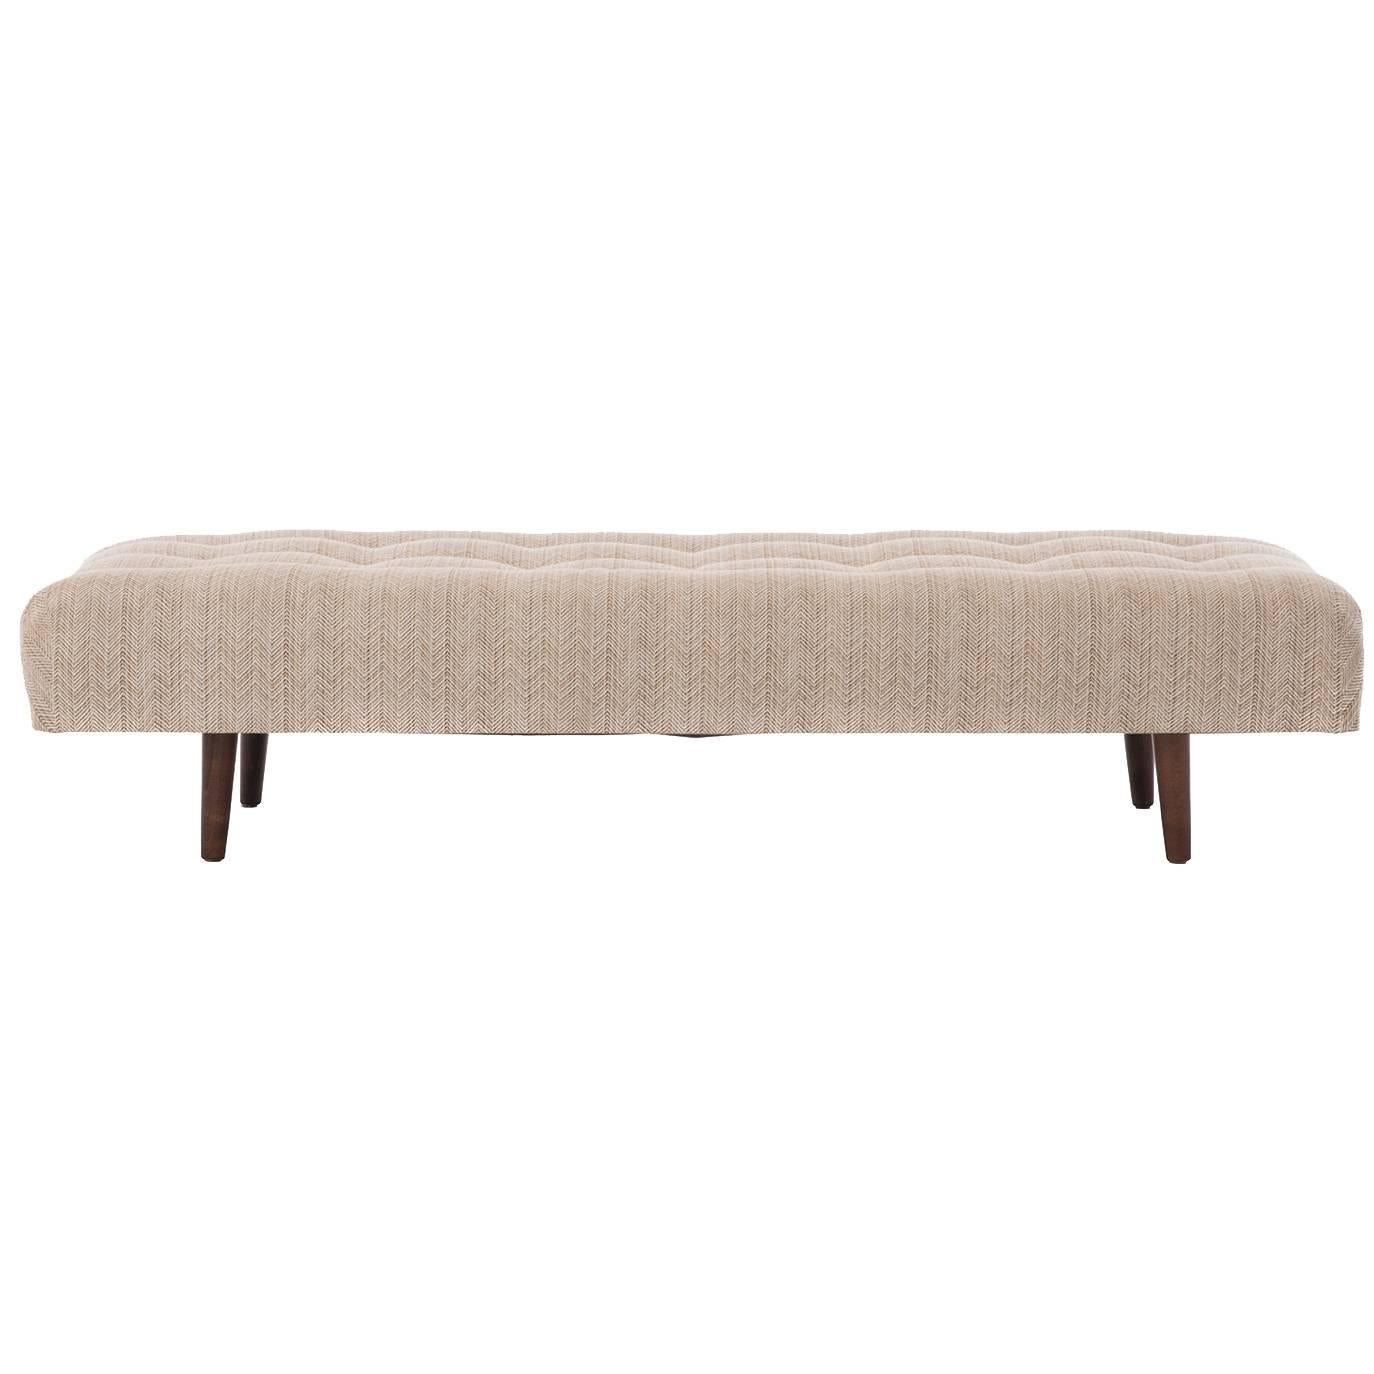 Danish Modern Tufted Daybed